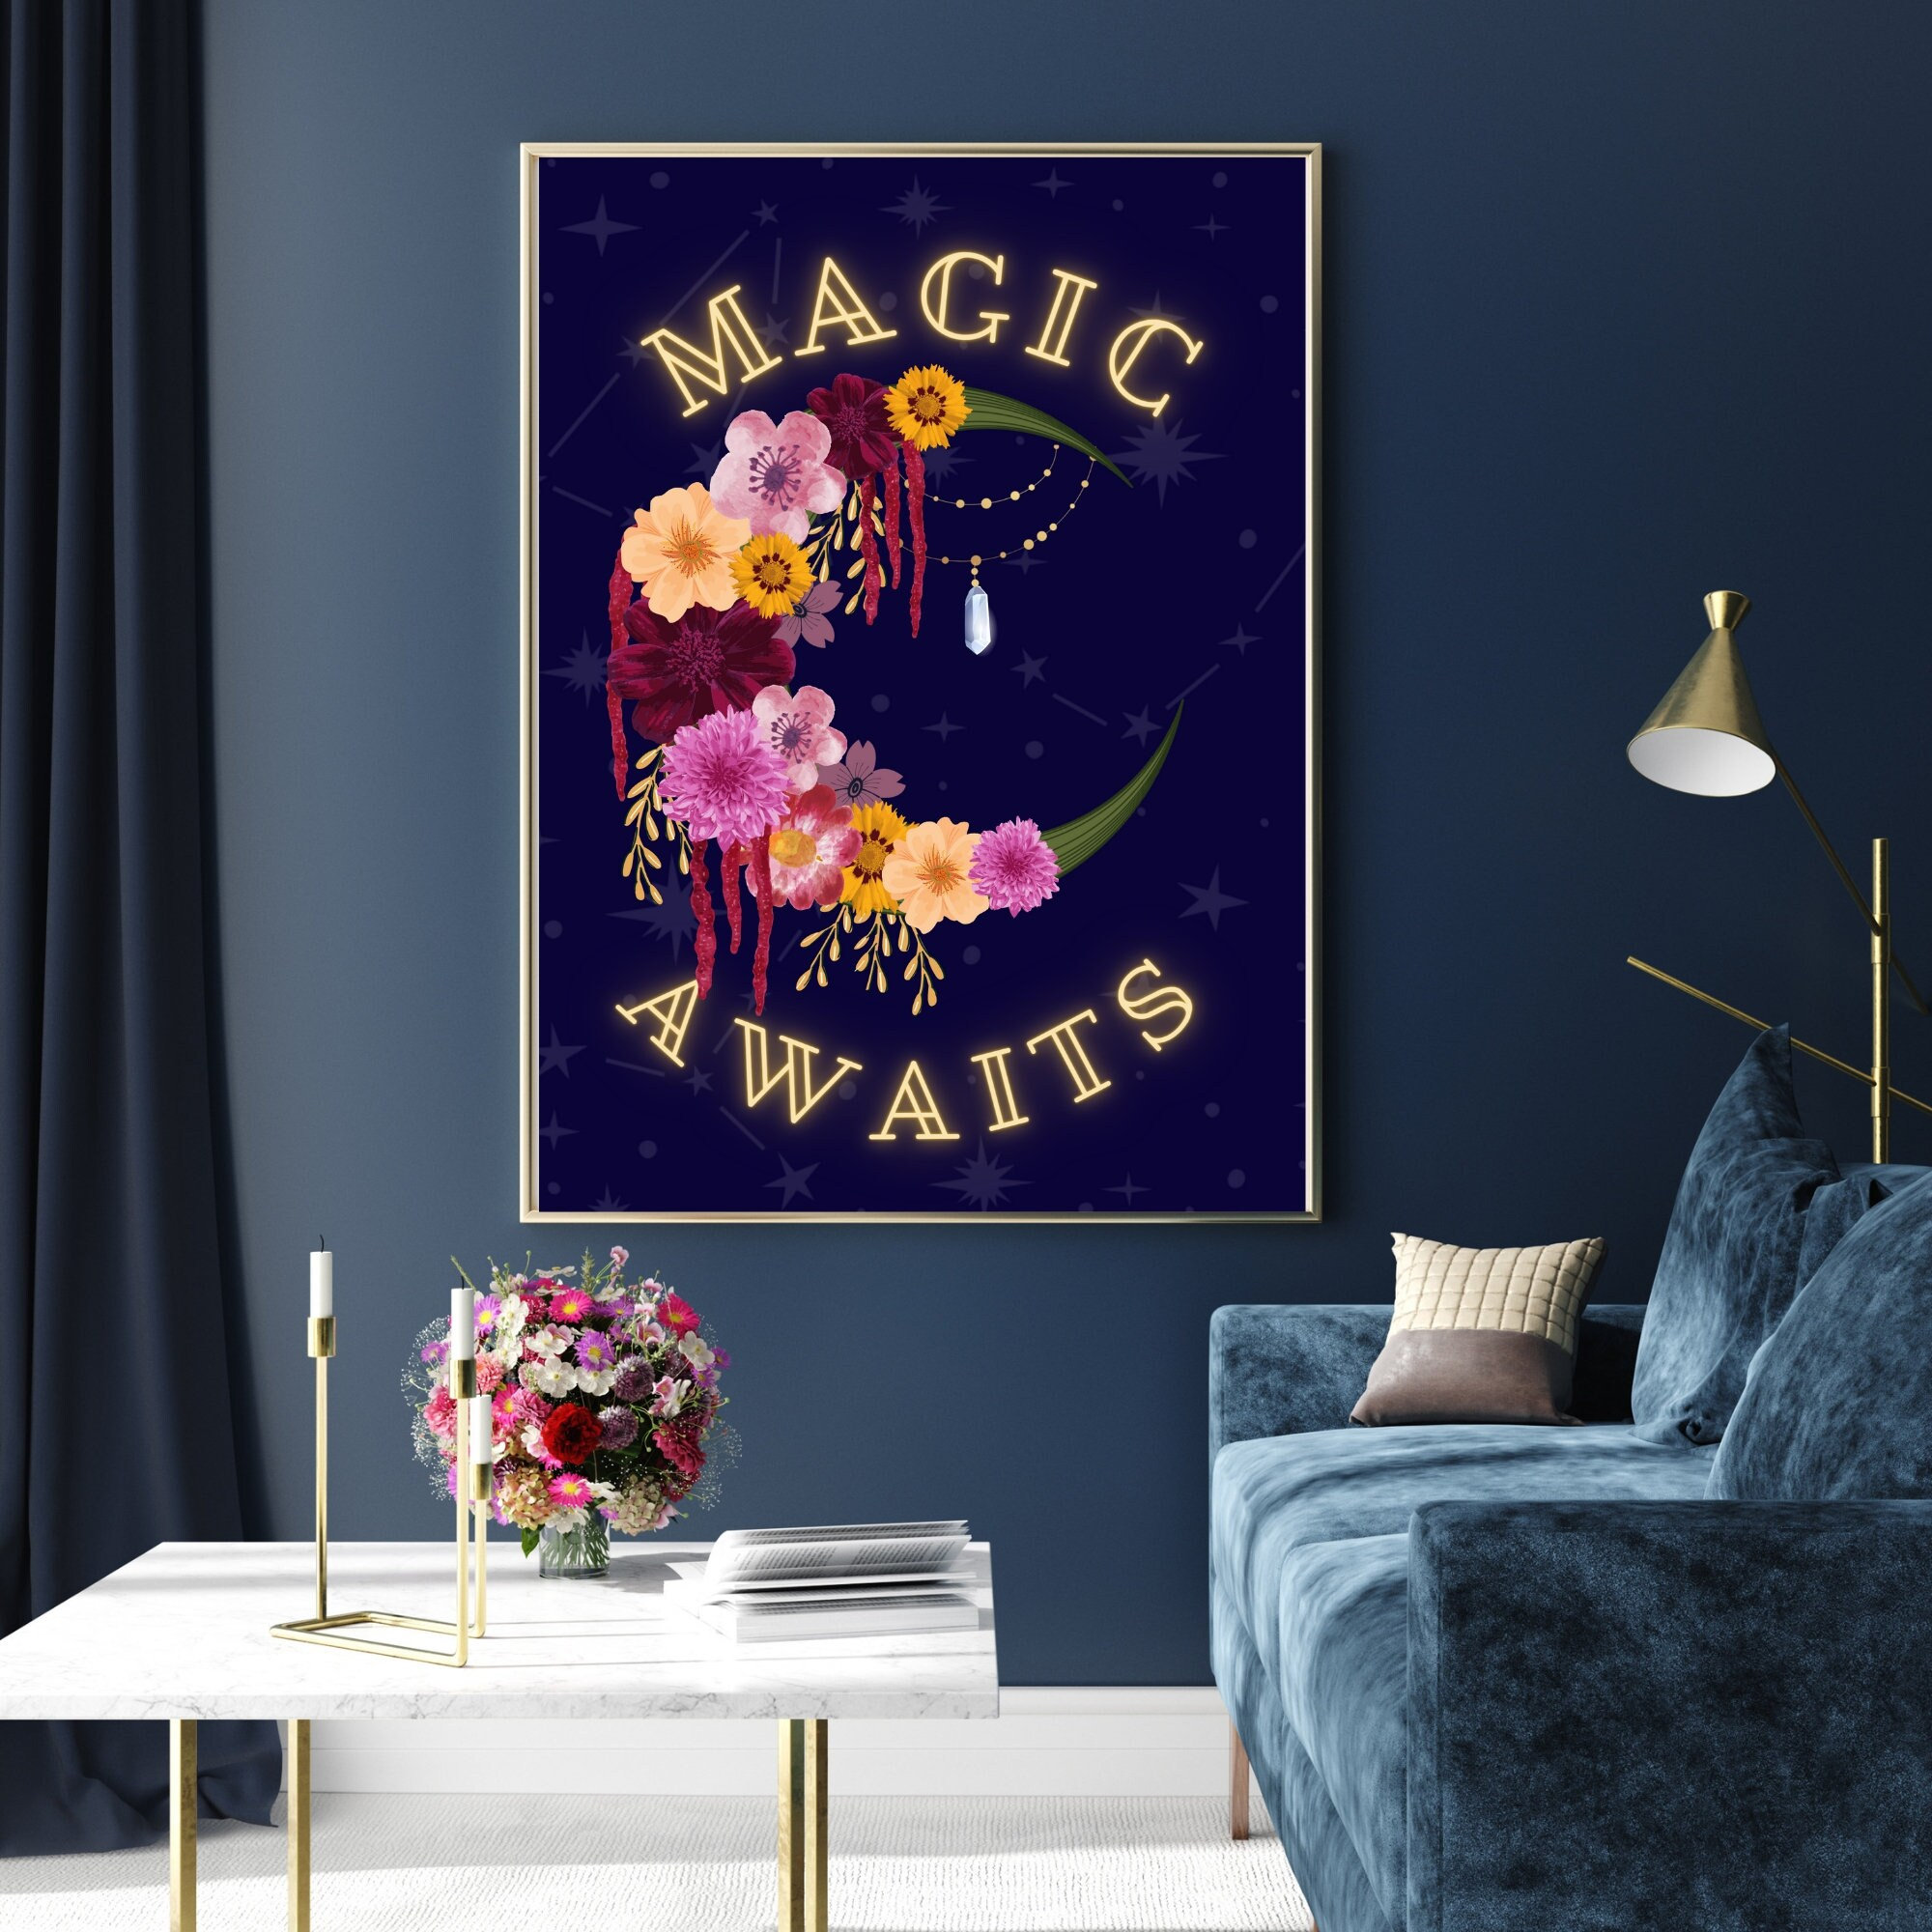 Witchy Wall Decor Printable Poster Witchy Room Decor - Etsy